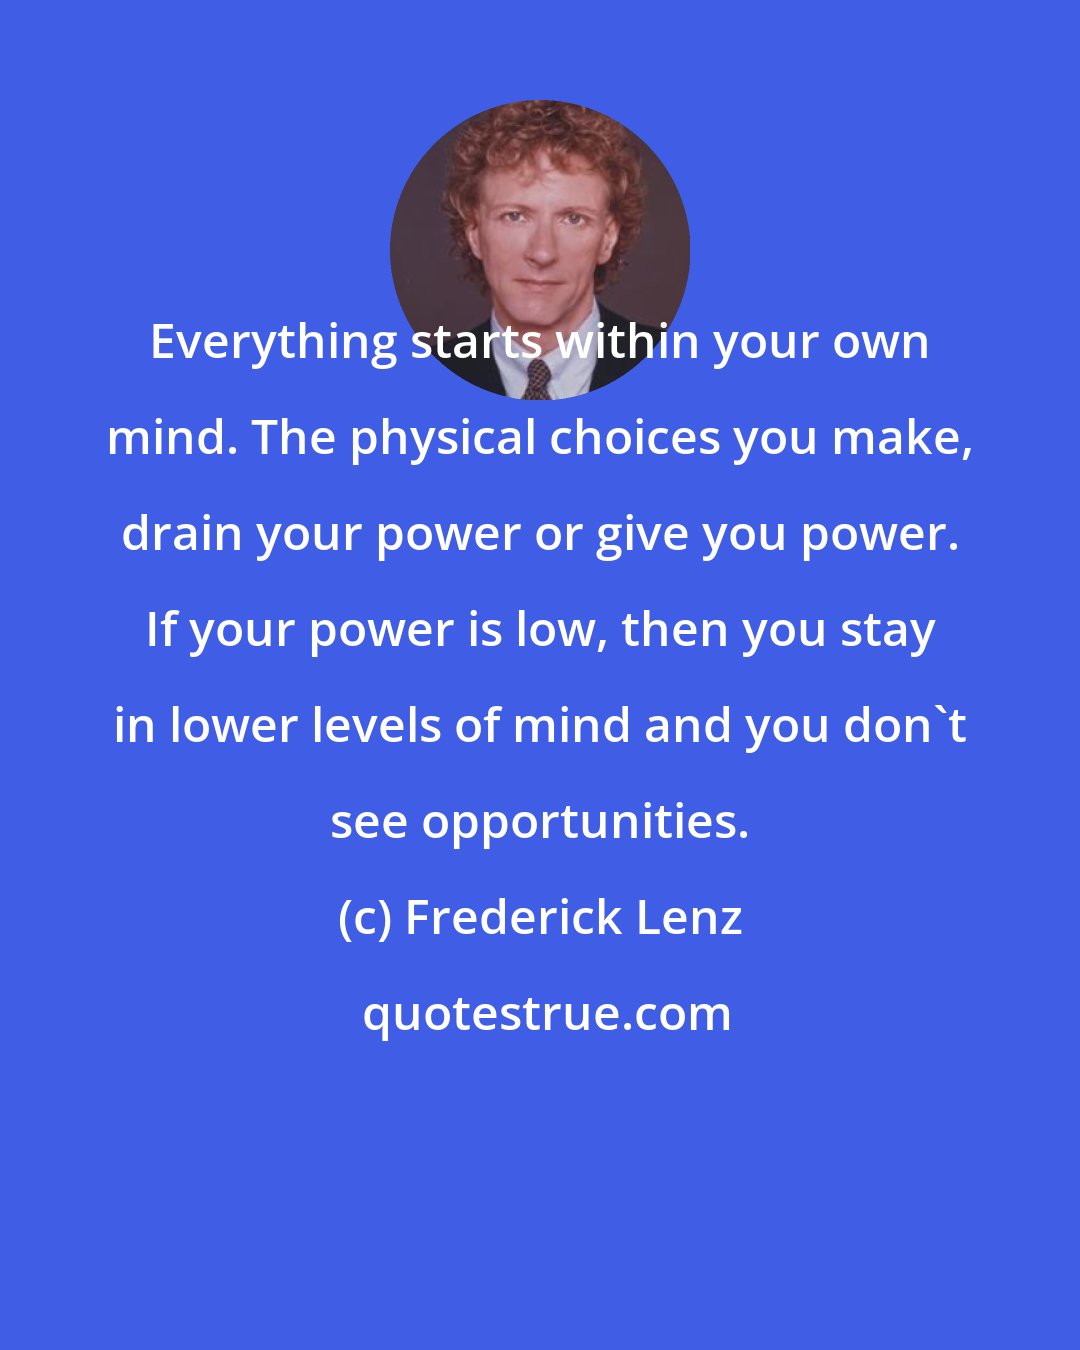 Frederick Lenz: Everything starts within your own mind. The physical choices you make, drain your power or give you power. If your power is low, then you stay in lower levels of mind and you don't see opportunities.